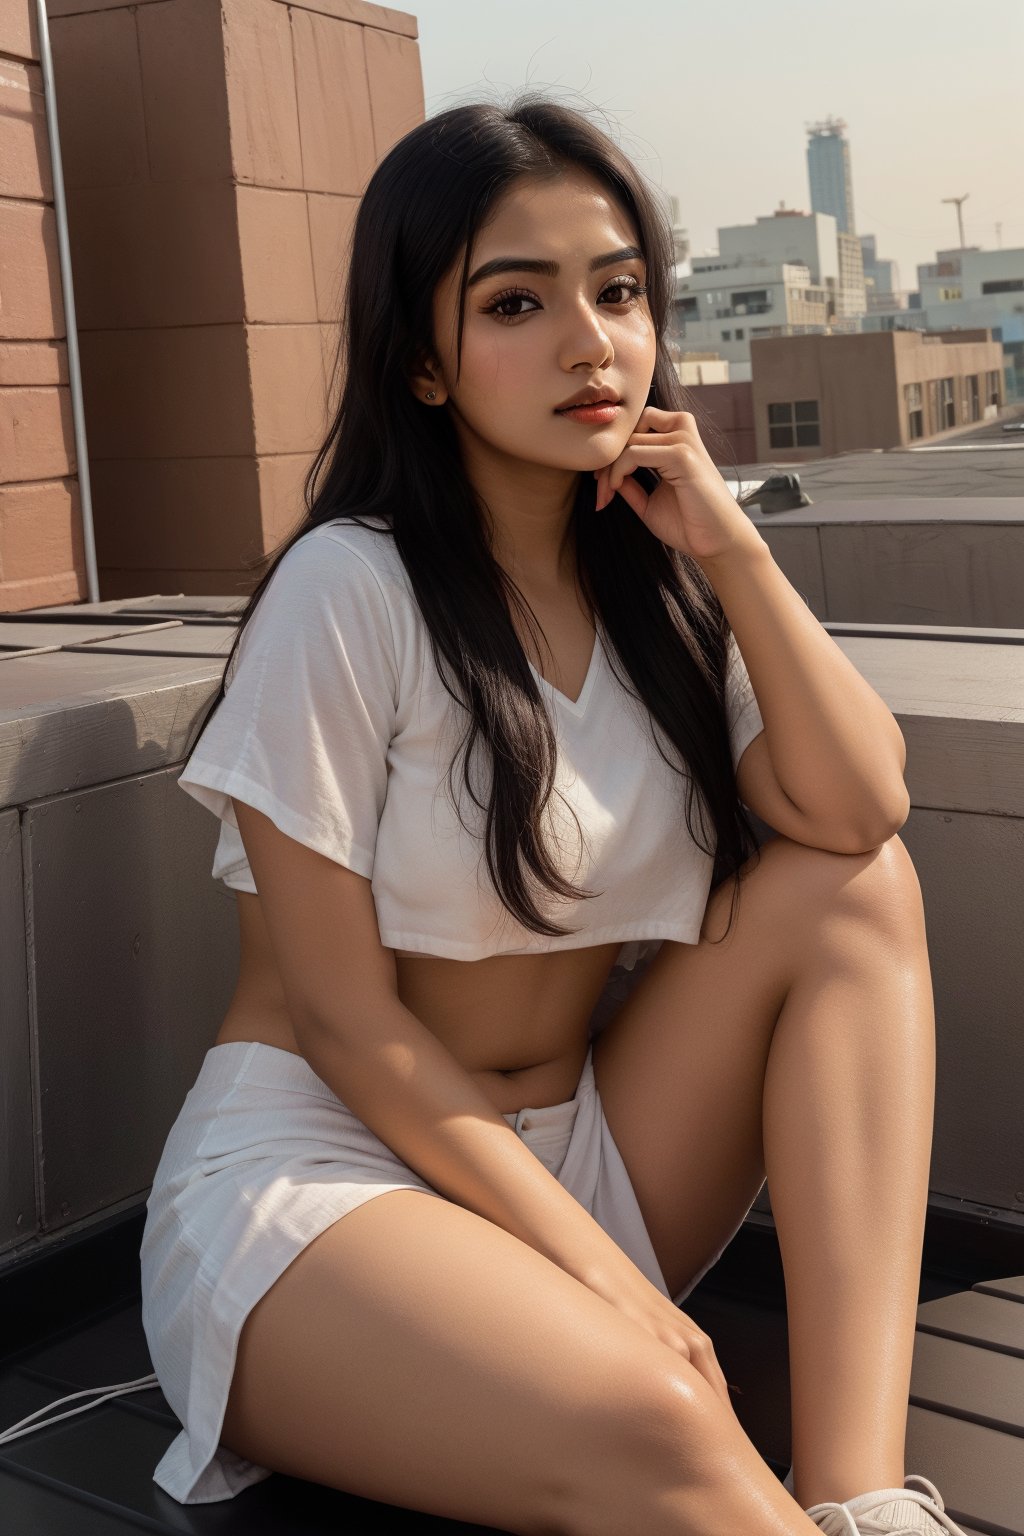 "Same face girl name Aria, round face, very dark Indian girl, Instagram influencer, black long hair, shiny juicy lips, brown eyes cute, 18 year old girl, photorealistic, portrait, extreme realism, sitting on the rooftop reading a book."